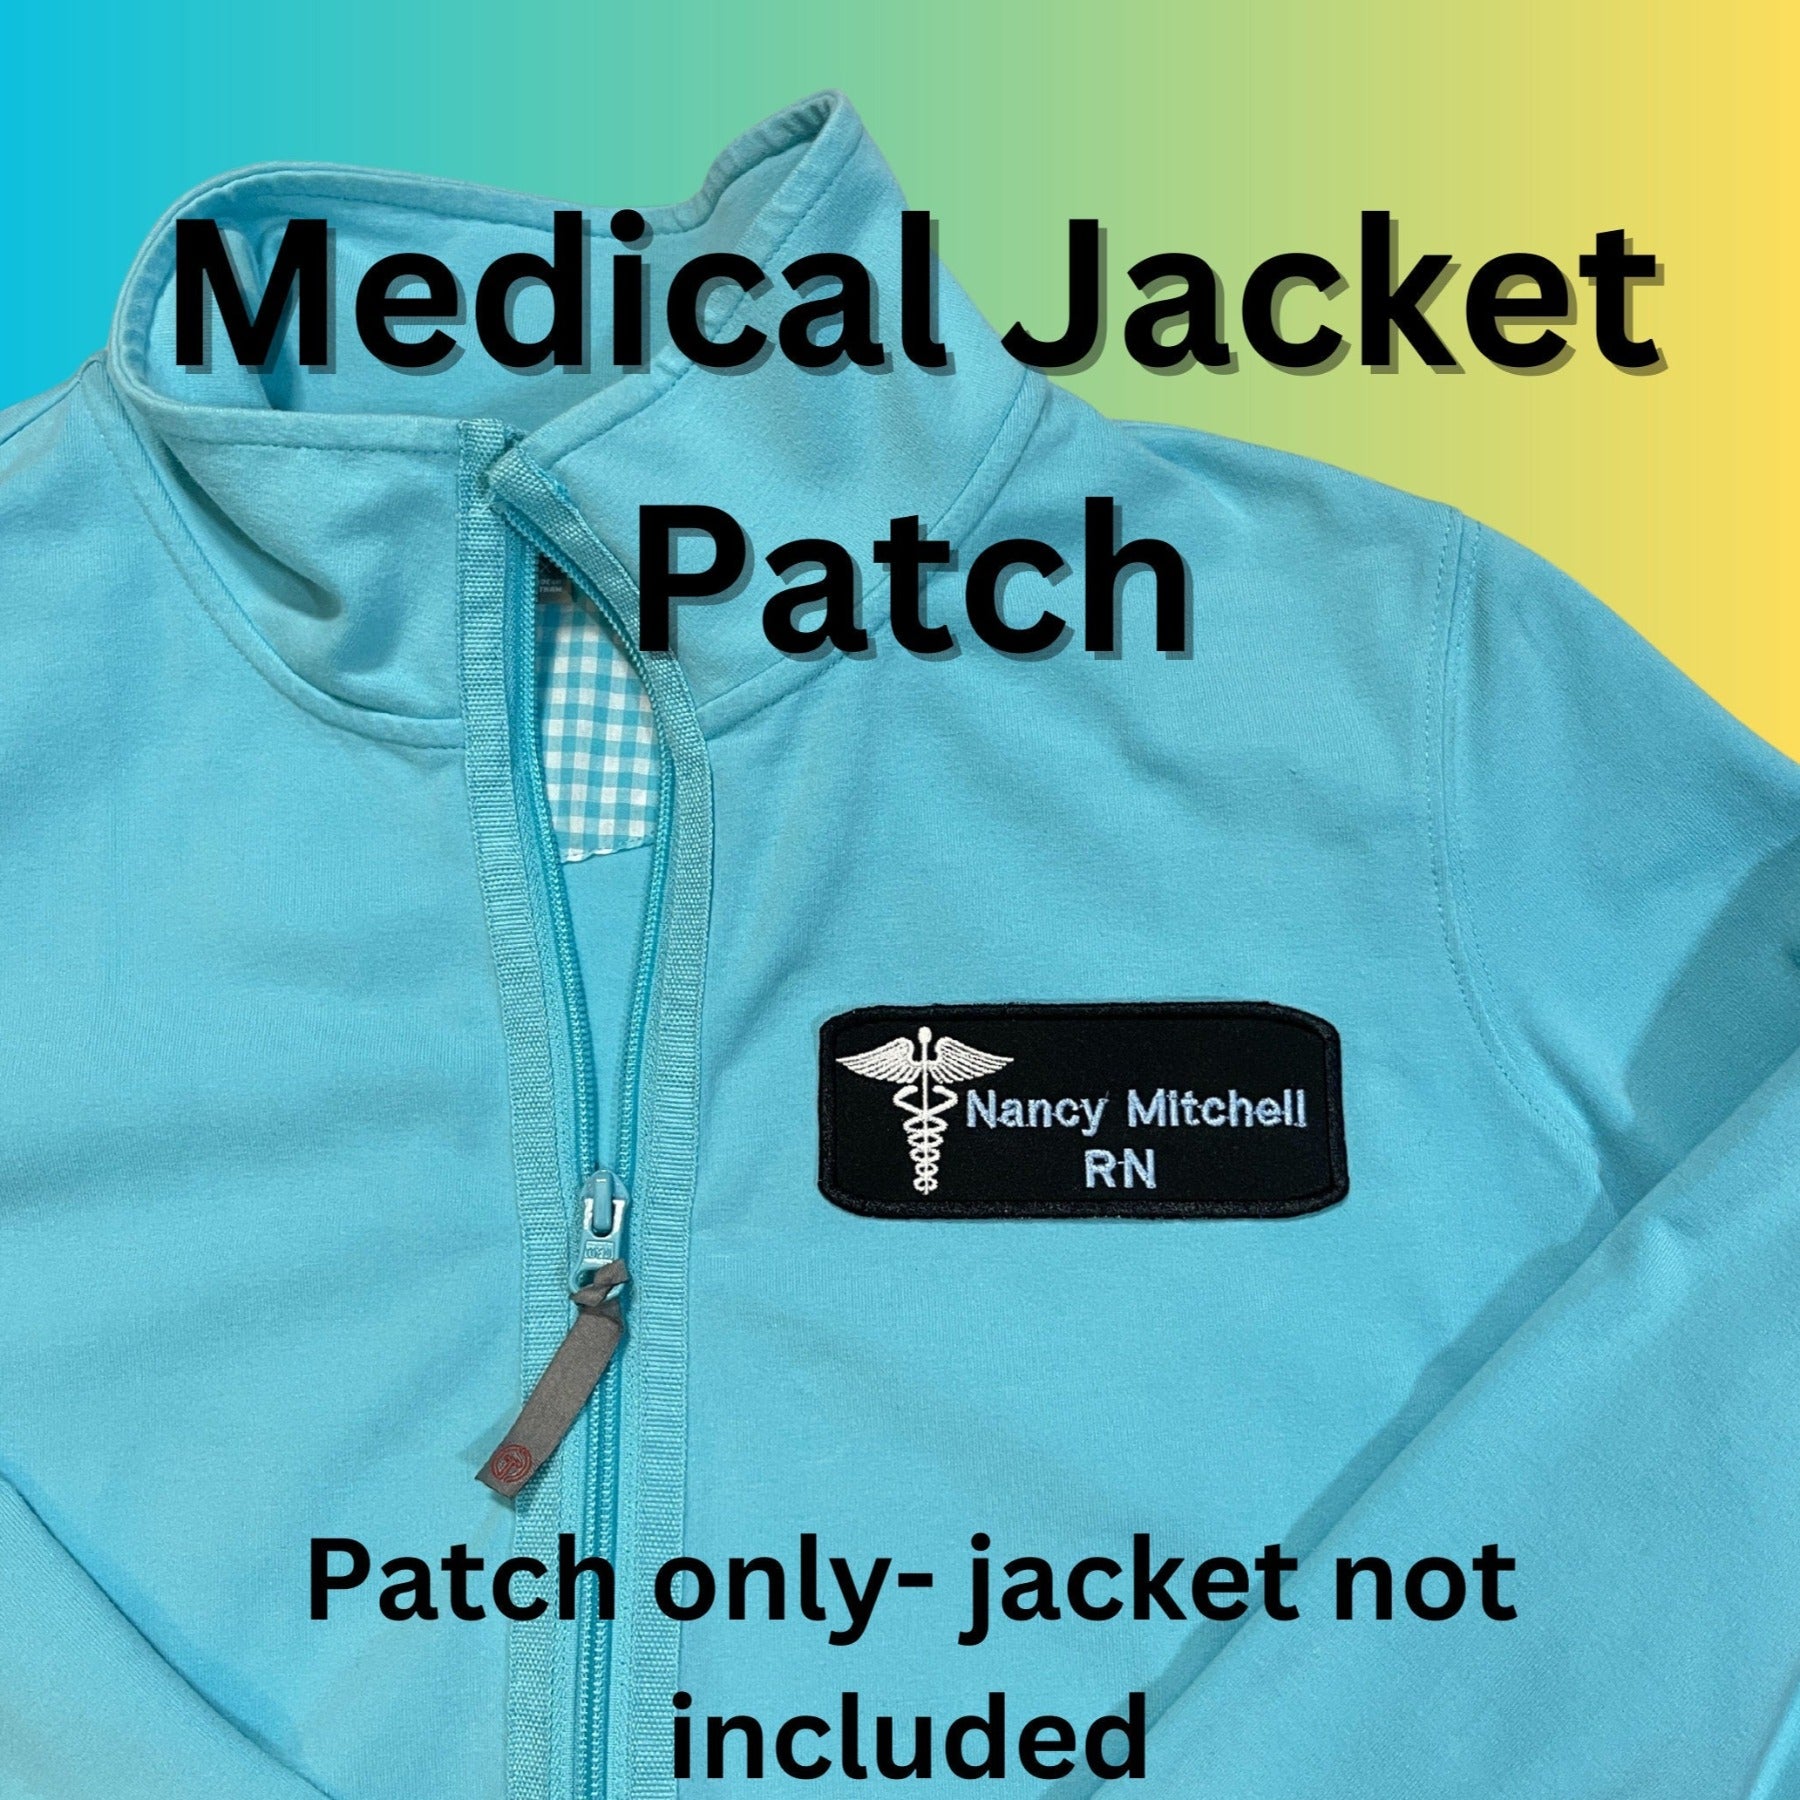 Embroidered Medical jacket patch with name and credentials